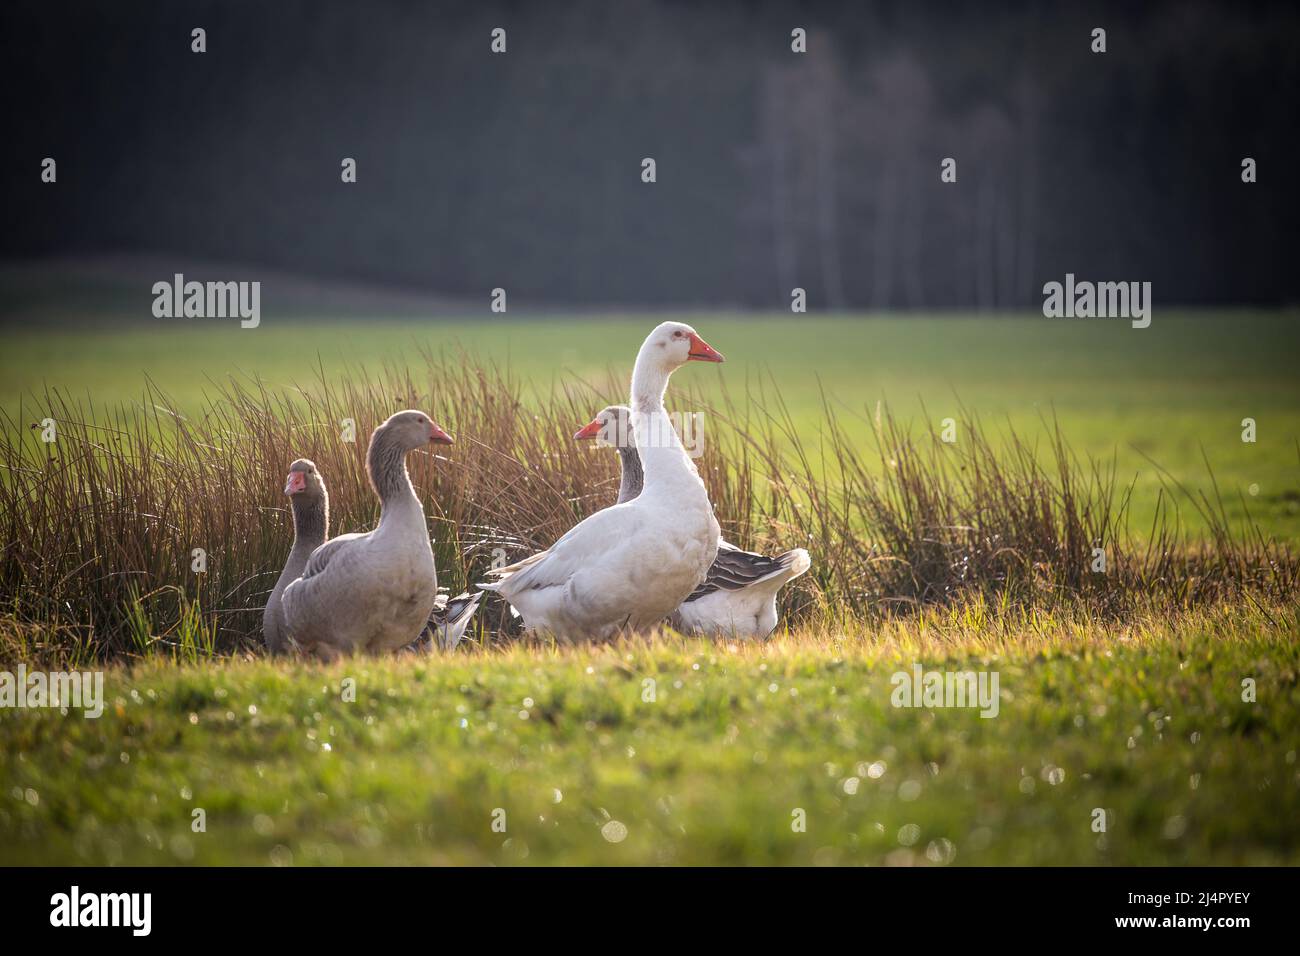 Flock of geese, geese family of the breed 'Österreichische Landgans', an endangered goose breed from Austria Stock Photo